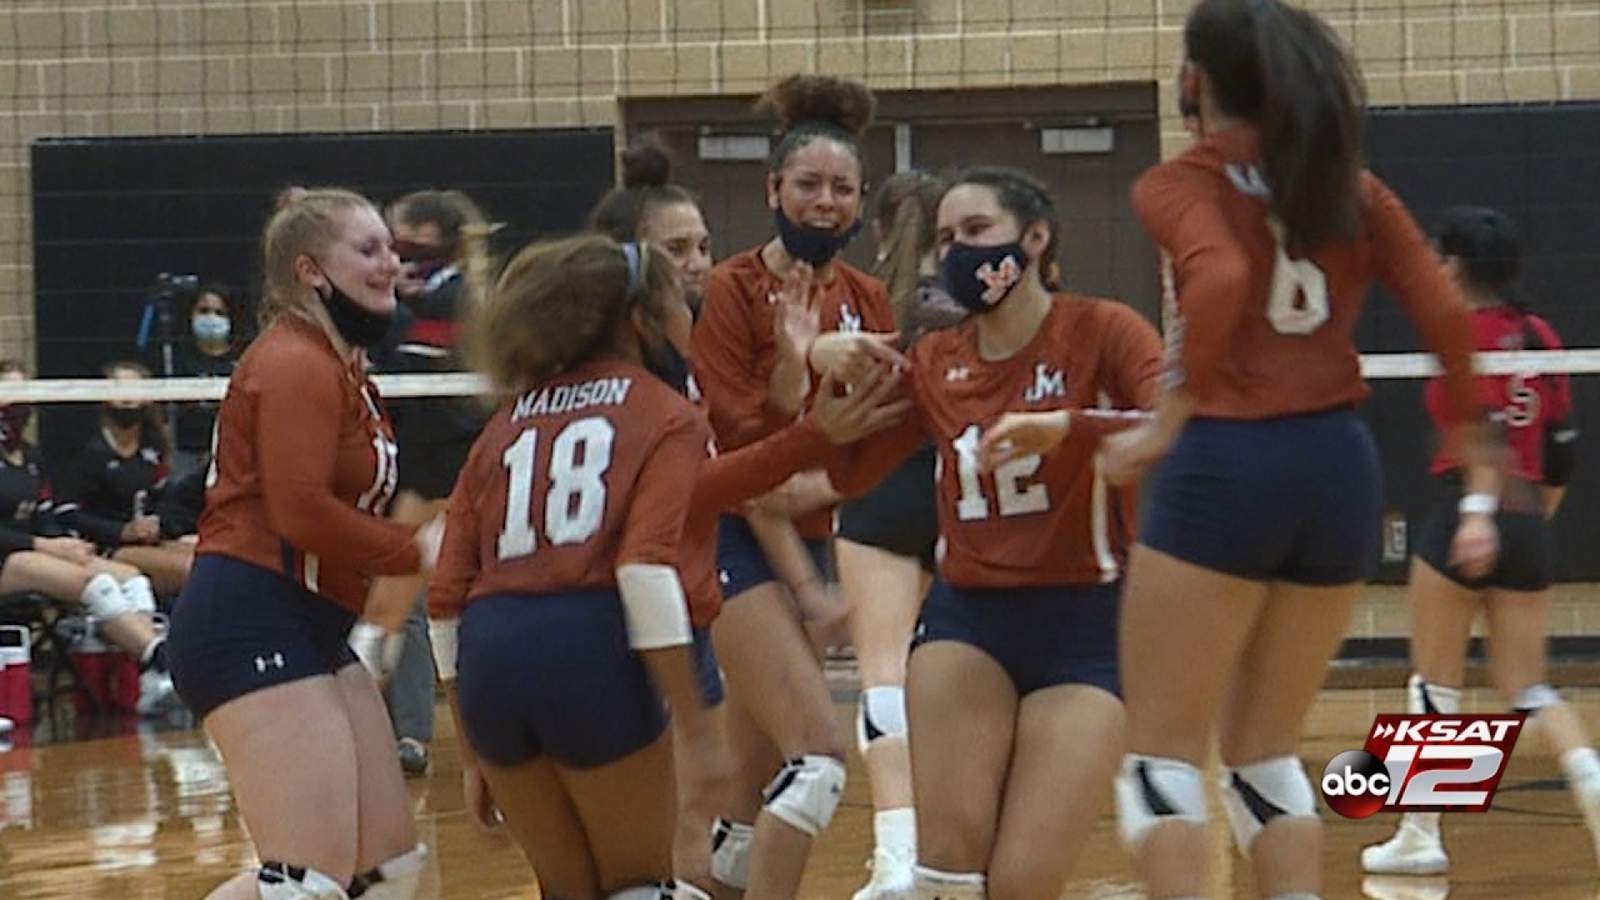 HIGHLIGHTS: Madison volleyball earns first win over Churchill in 20 years